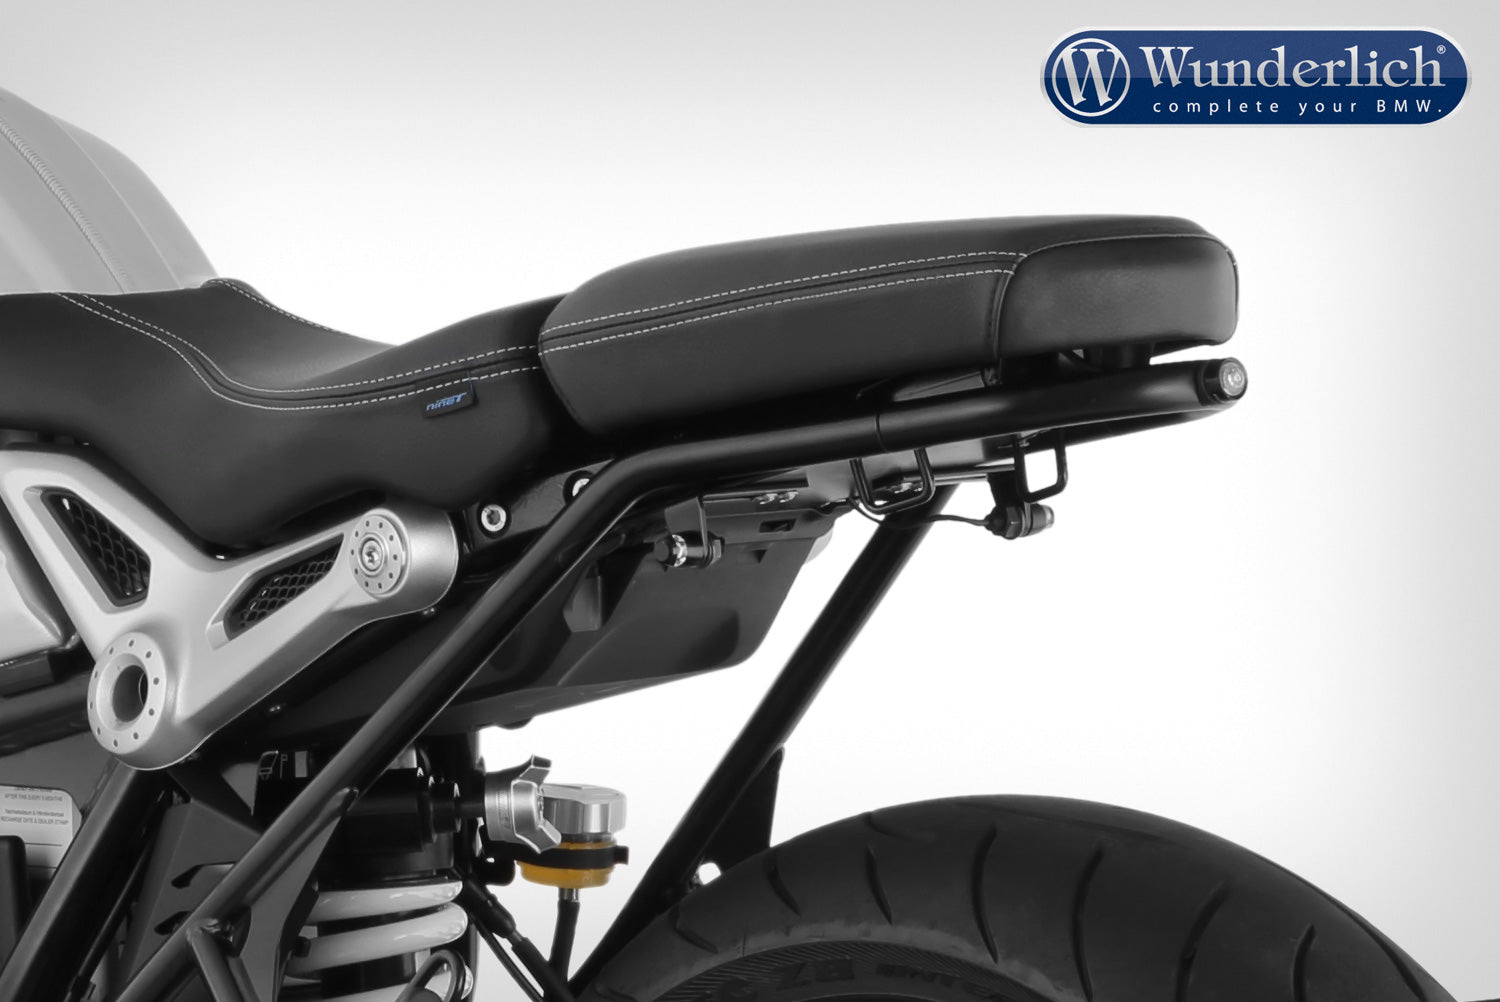 Tail section R nineT with tail light - incl. taillight - black